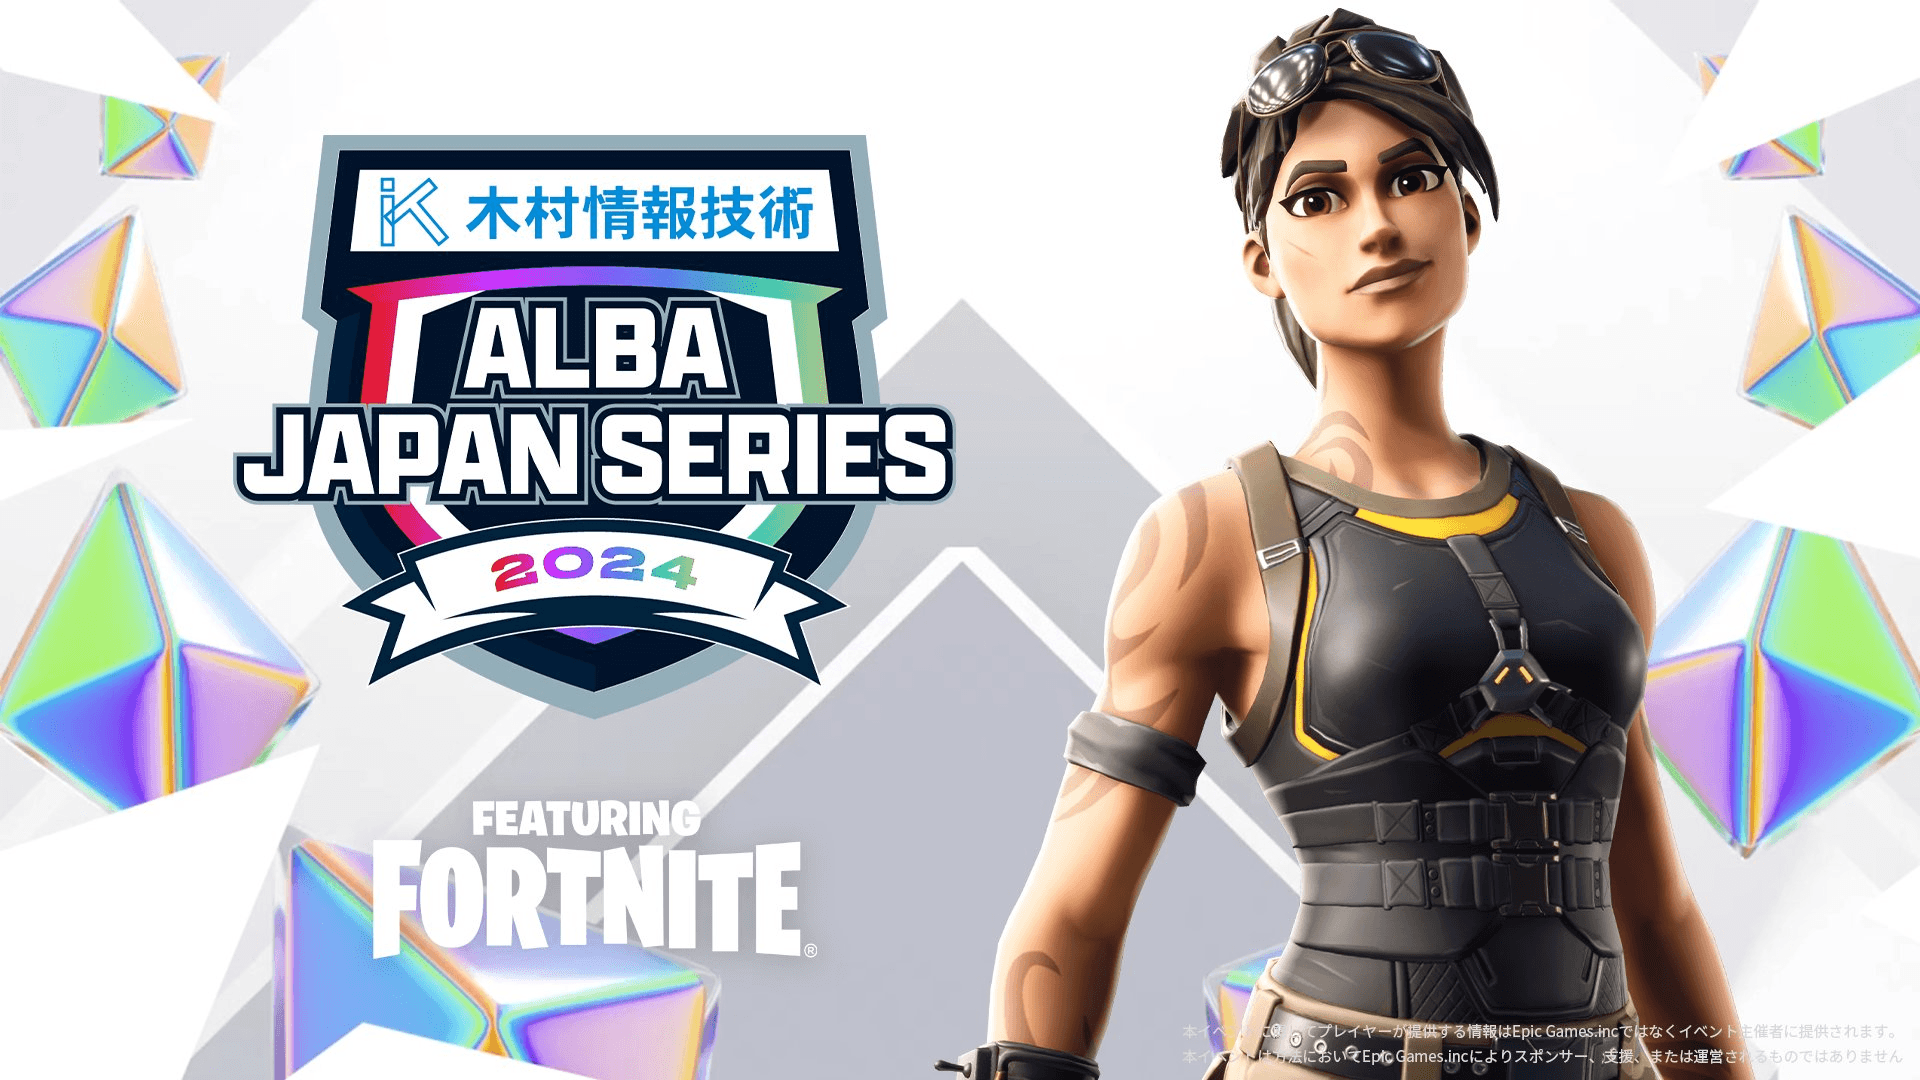 ALBA JAPAN SERIES featuring Fortnite #5 feature image